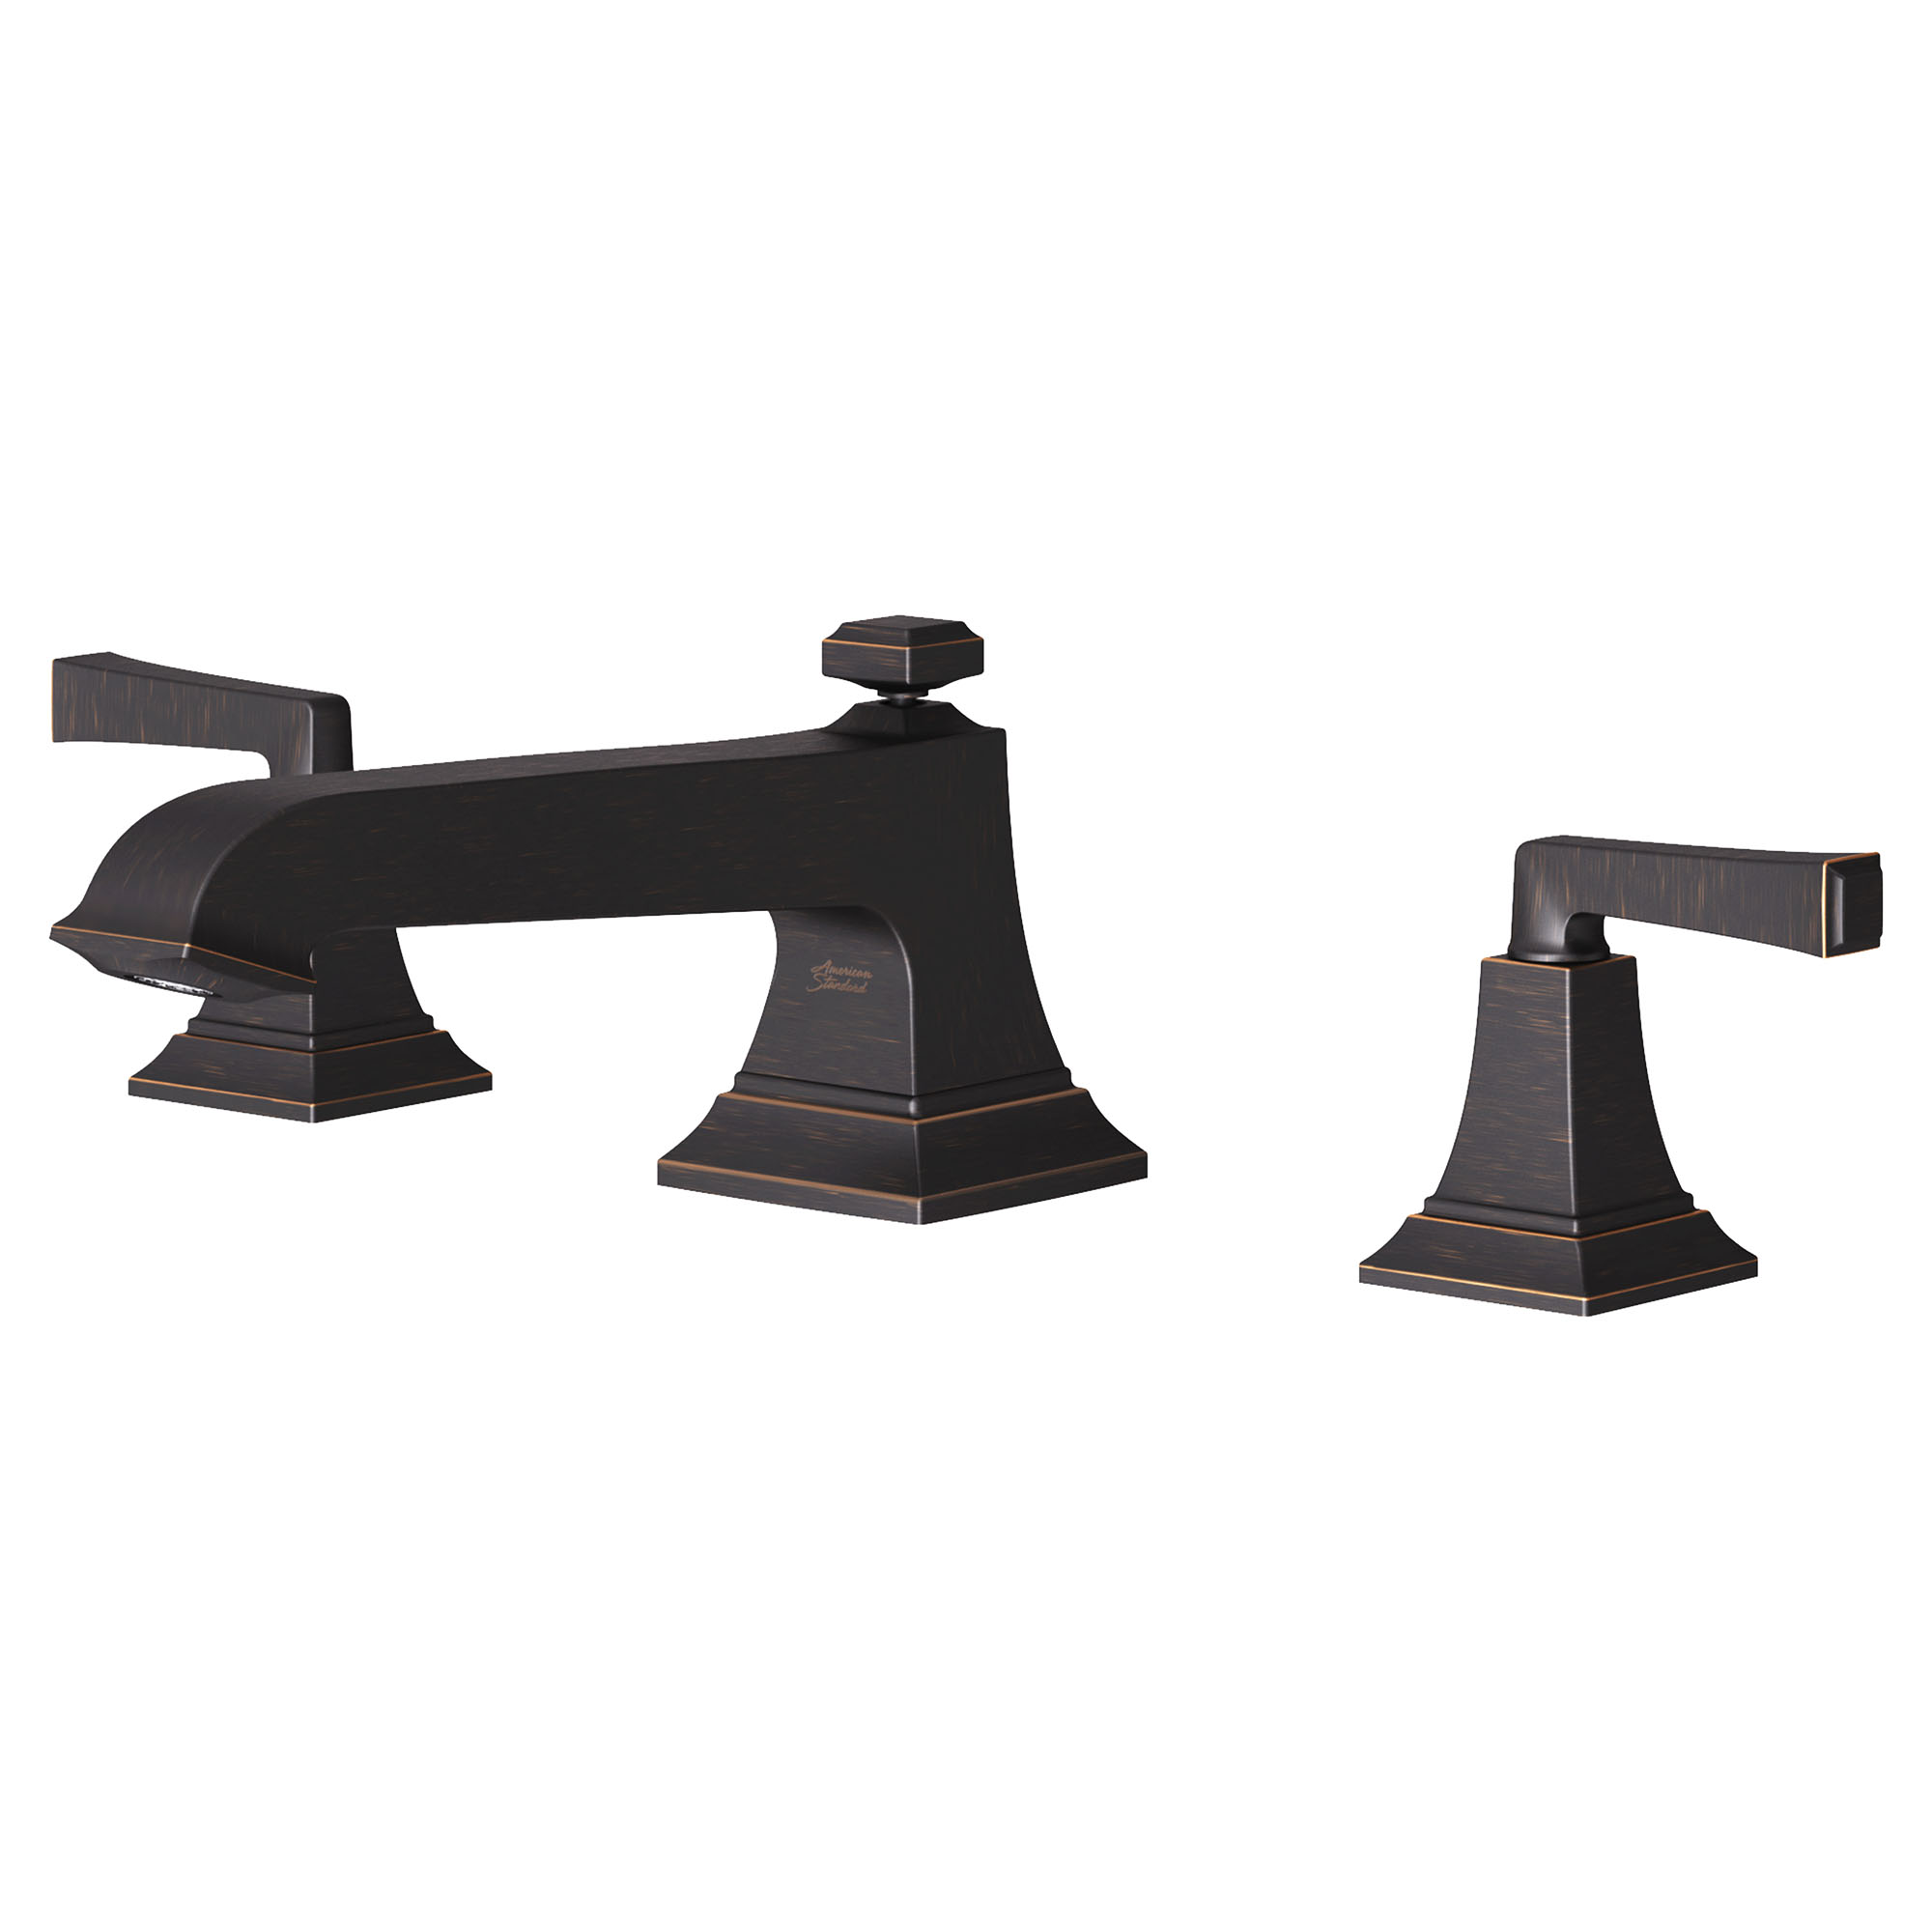 Town Square™ S Bathub Faucet With Lever Handles for Flash™ Rough-In Valve